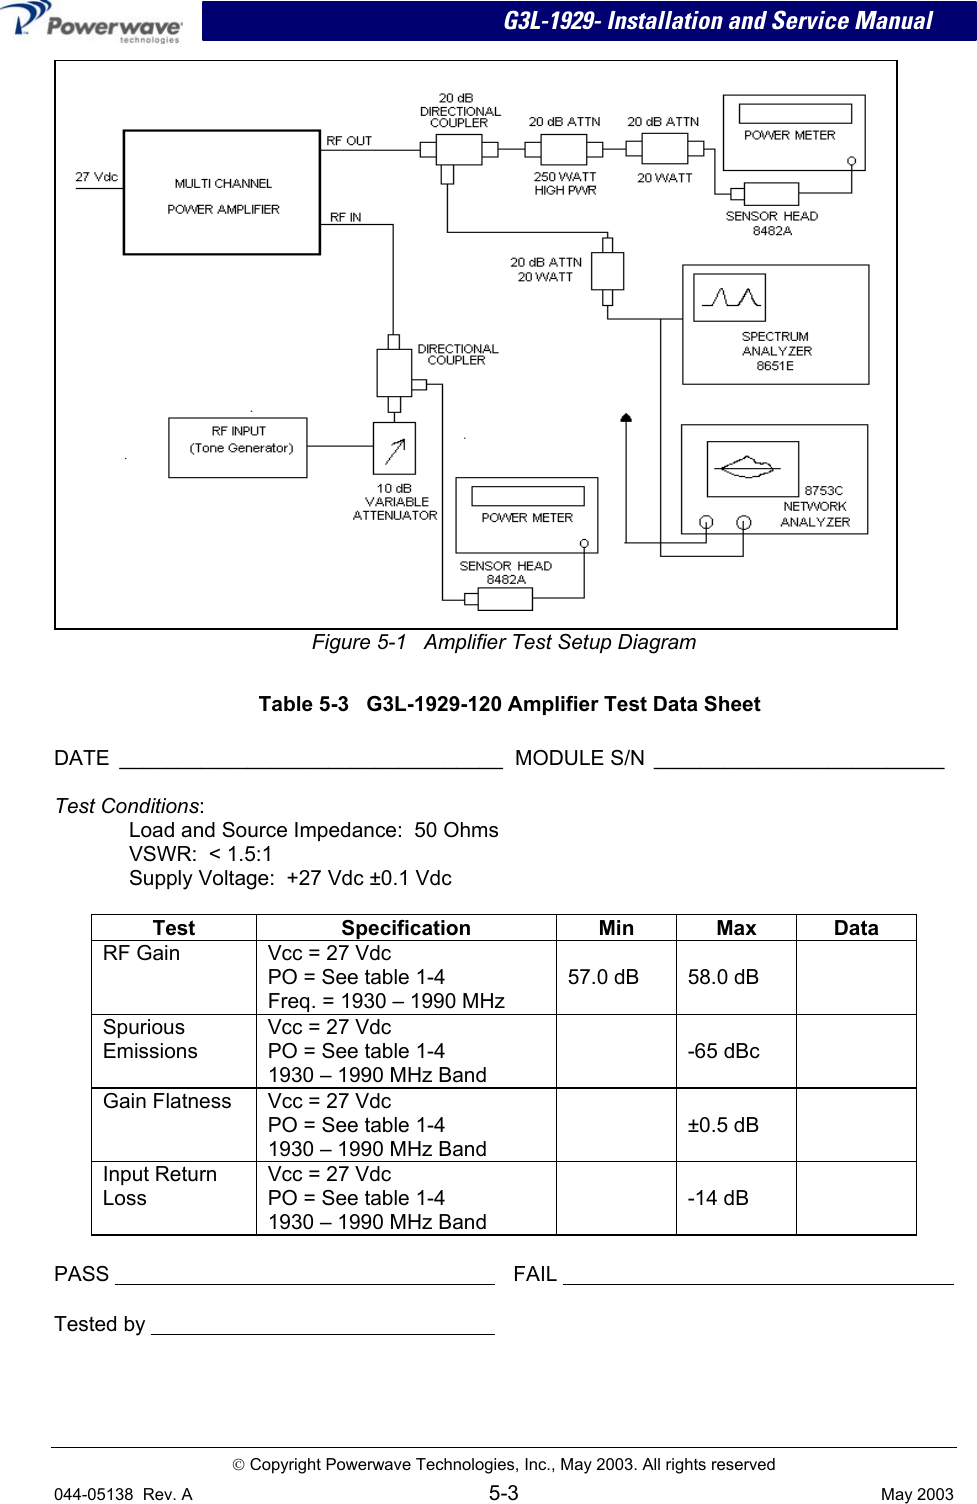  G3L-1929- Installation and Service Manual  Figure 5-1   Amplifier Test Setup Diagram Table 5-3   G3L-1929-120 Amplifier Test Data Sheet  DATE _________________________________  MODULE S/N _________________________   Test Conditions: Load and Source Impedance:  50 Ohms VSWR:  &lt; 1.5:1 Supply Voltage:  +27 Vdc ±0.1 Vdc  Test Specification Min Max Data RF Gain  Vcc = 27 Vdc PO = See table 1-4 Freq. = 1930 – 1990 MHz 57.0 dB  58.0 dB  Spurious Emissions  Vcc = 27 Vdc PO = See table 1-4 1930 – 1990 MHz Band  -65 dBc  Gain Flatness  Vcc = 27 Vdc PO = See table 1-4 1930 – 1990 MHz Band  ±0.5 dB  Input Return Loss Vcc = 27 Vdc PO = See table 1-4 1930 – 1990 MHz Band  -14 dB  PASS    FAIL    Tested by      Copyright Powerwave Technologies, Inc., May 2003. All rights reserved 044-05138  Rev. A 5-3  May 2003 